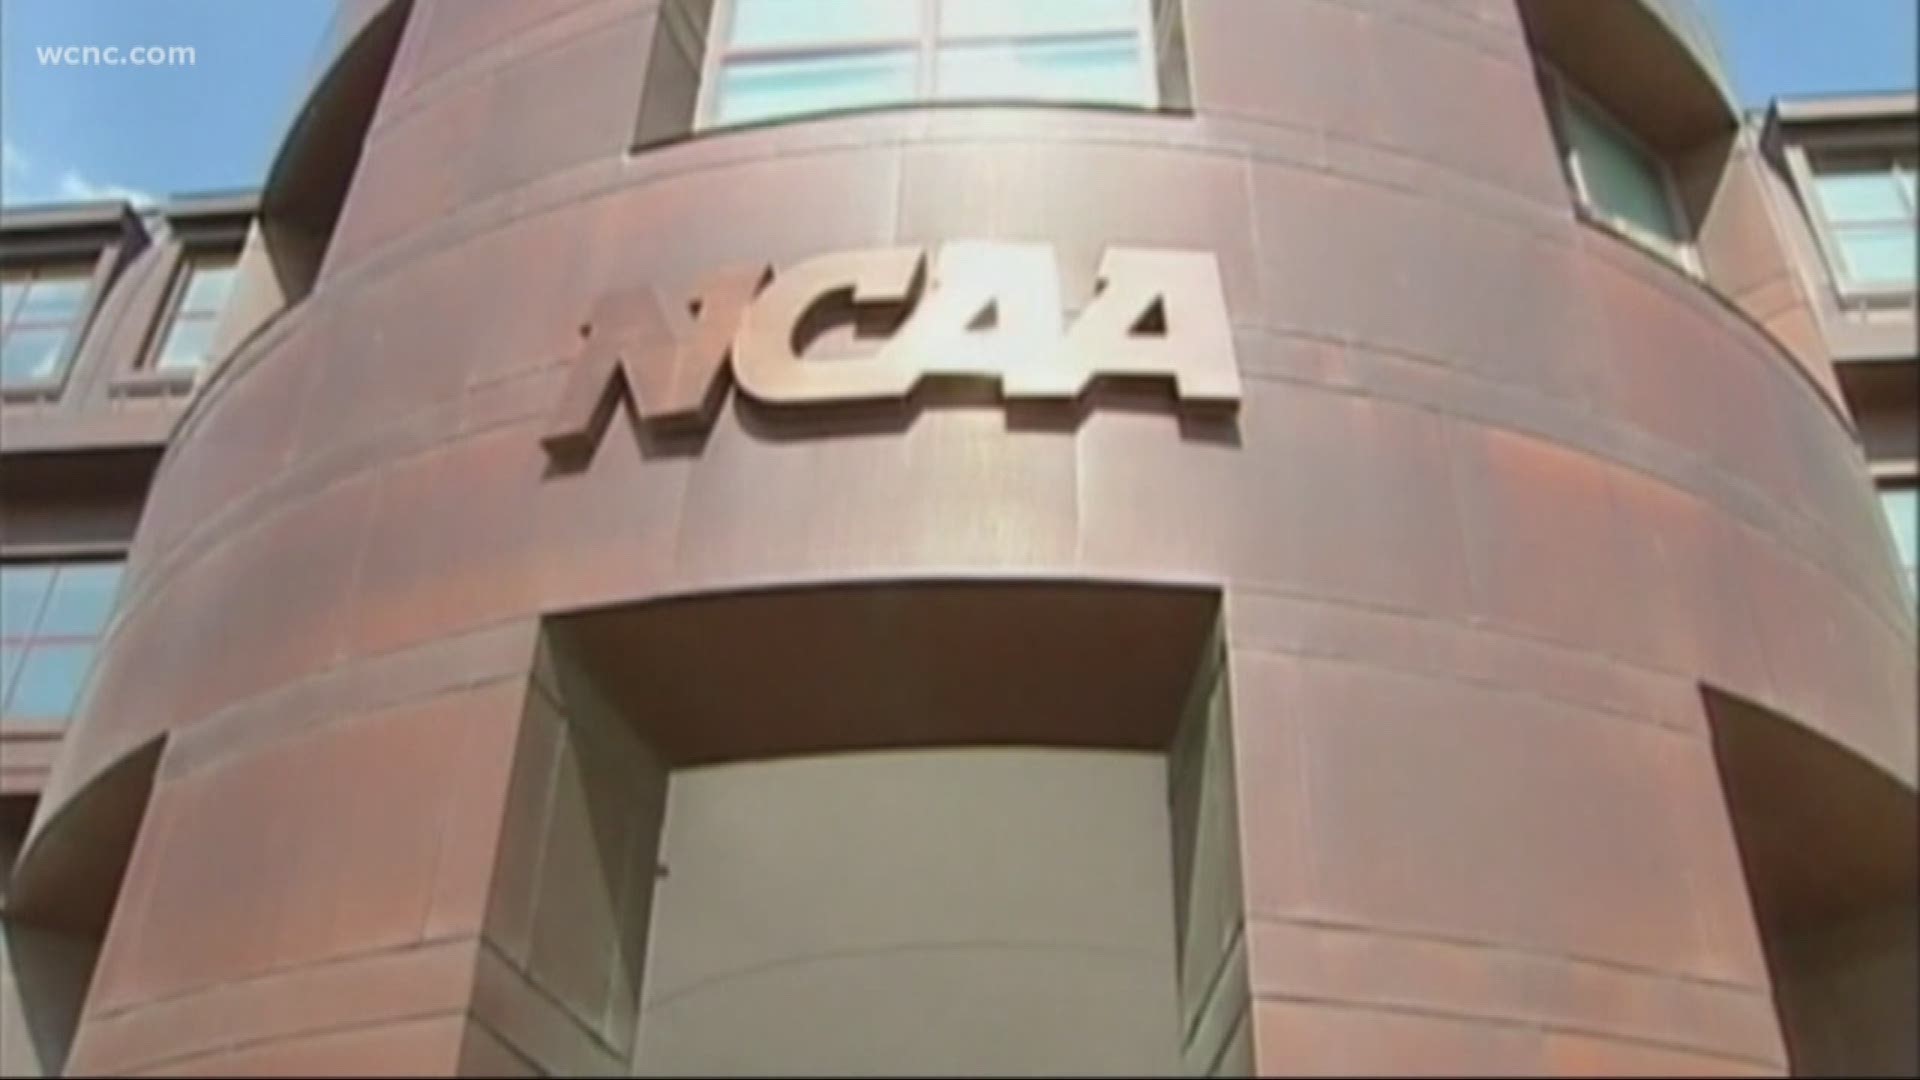 A recent college basketball scandal is leading to sweeping changes in the sport.